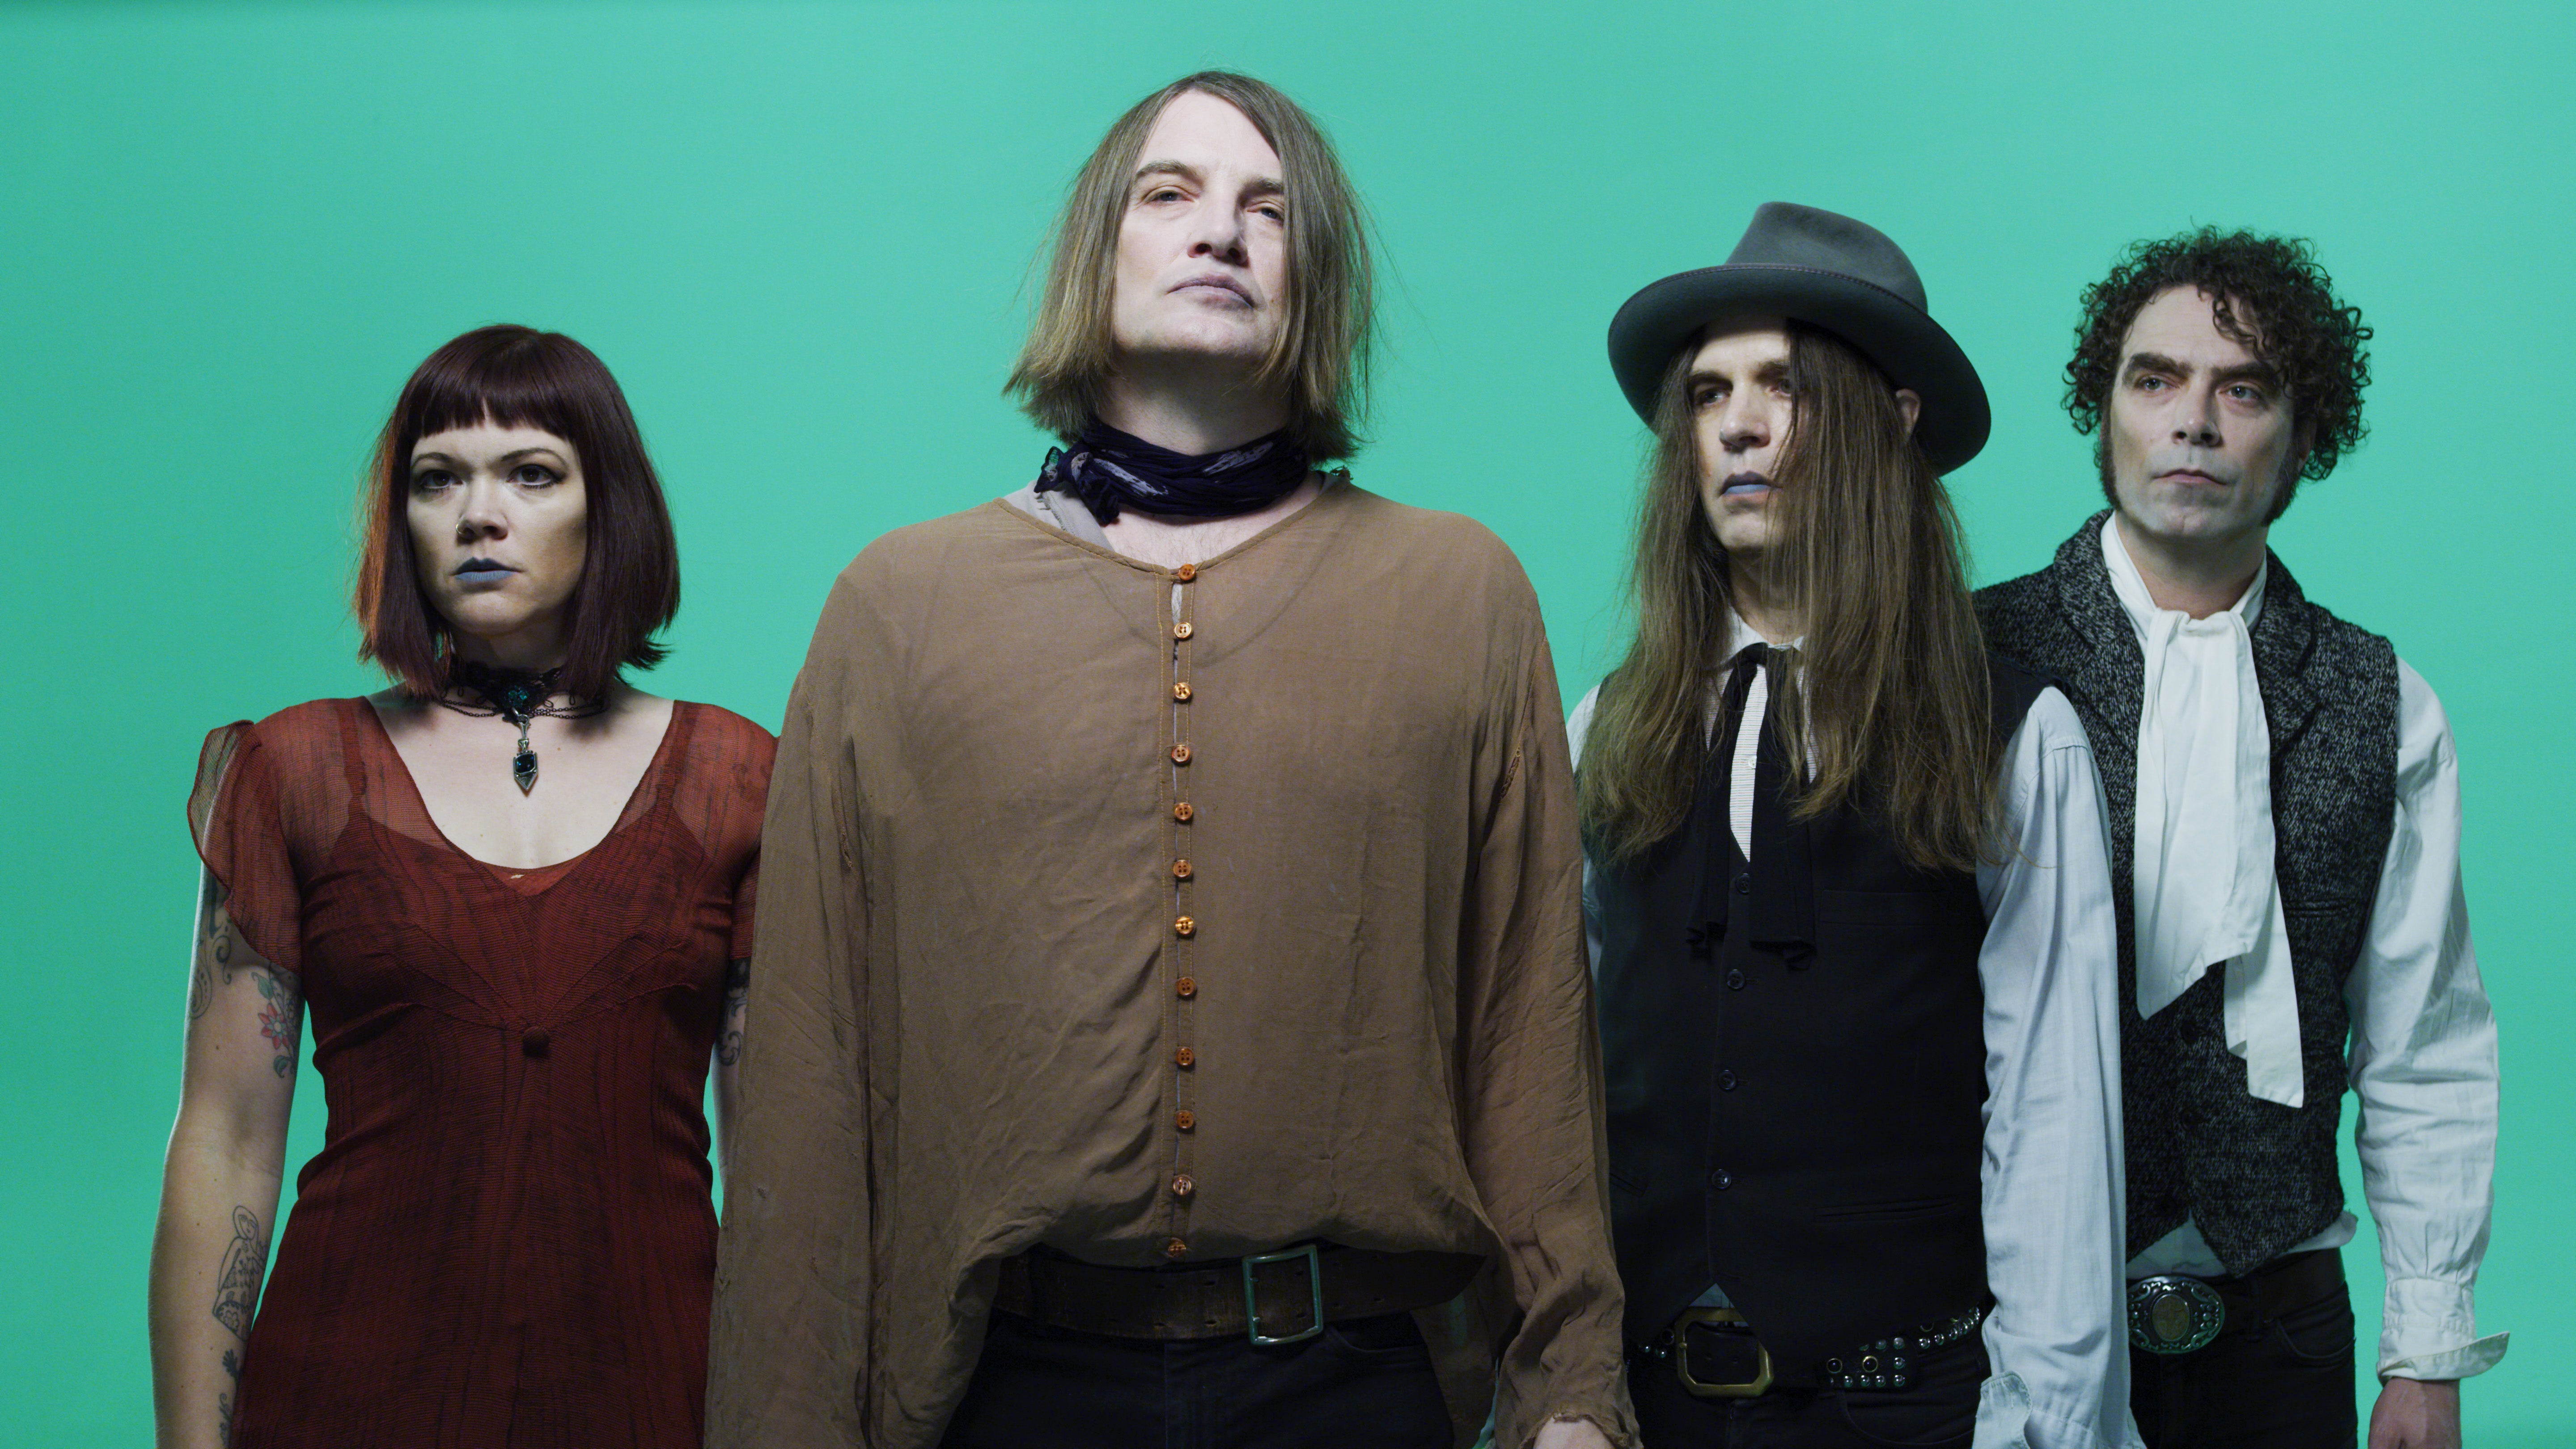 The Dandy Warhols + The Black Angels in London promo photo for Priority from O2 presale offer code